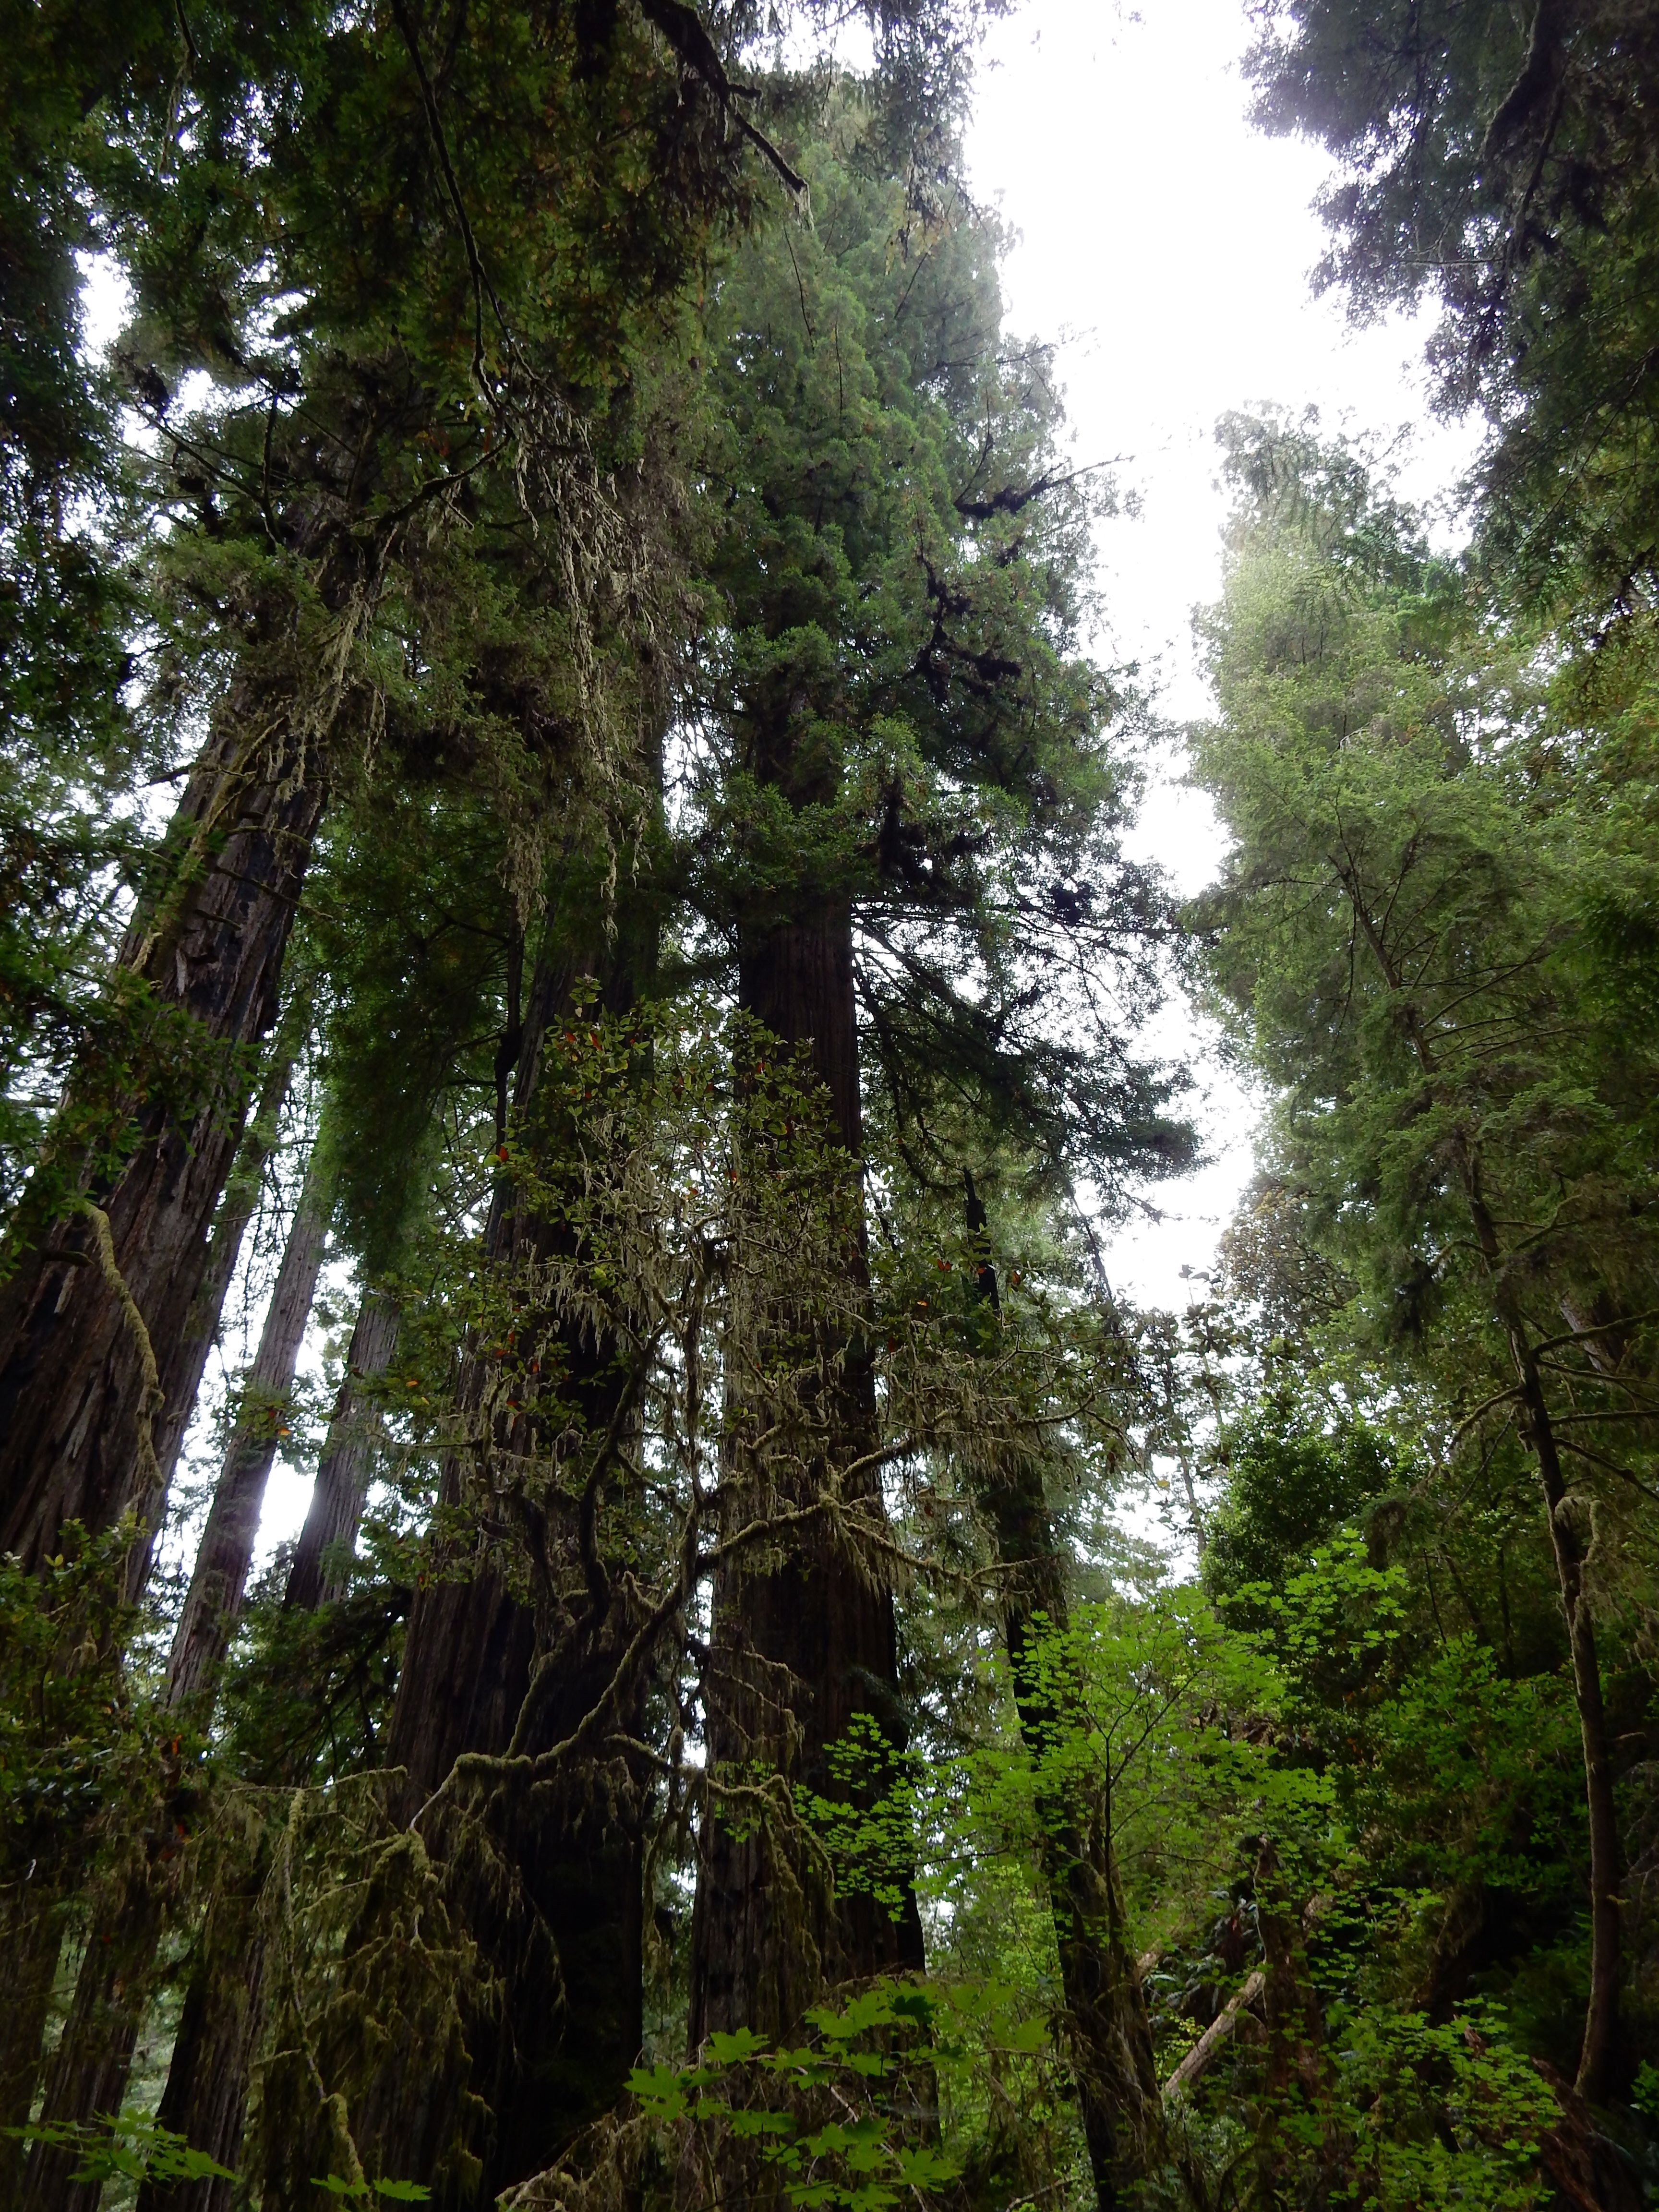 Yet another attempt to capture an entire redwood in a single frame. I need a wider angle lens.